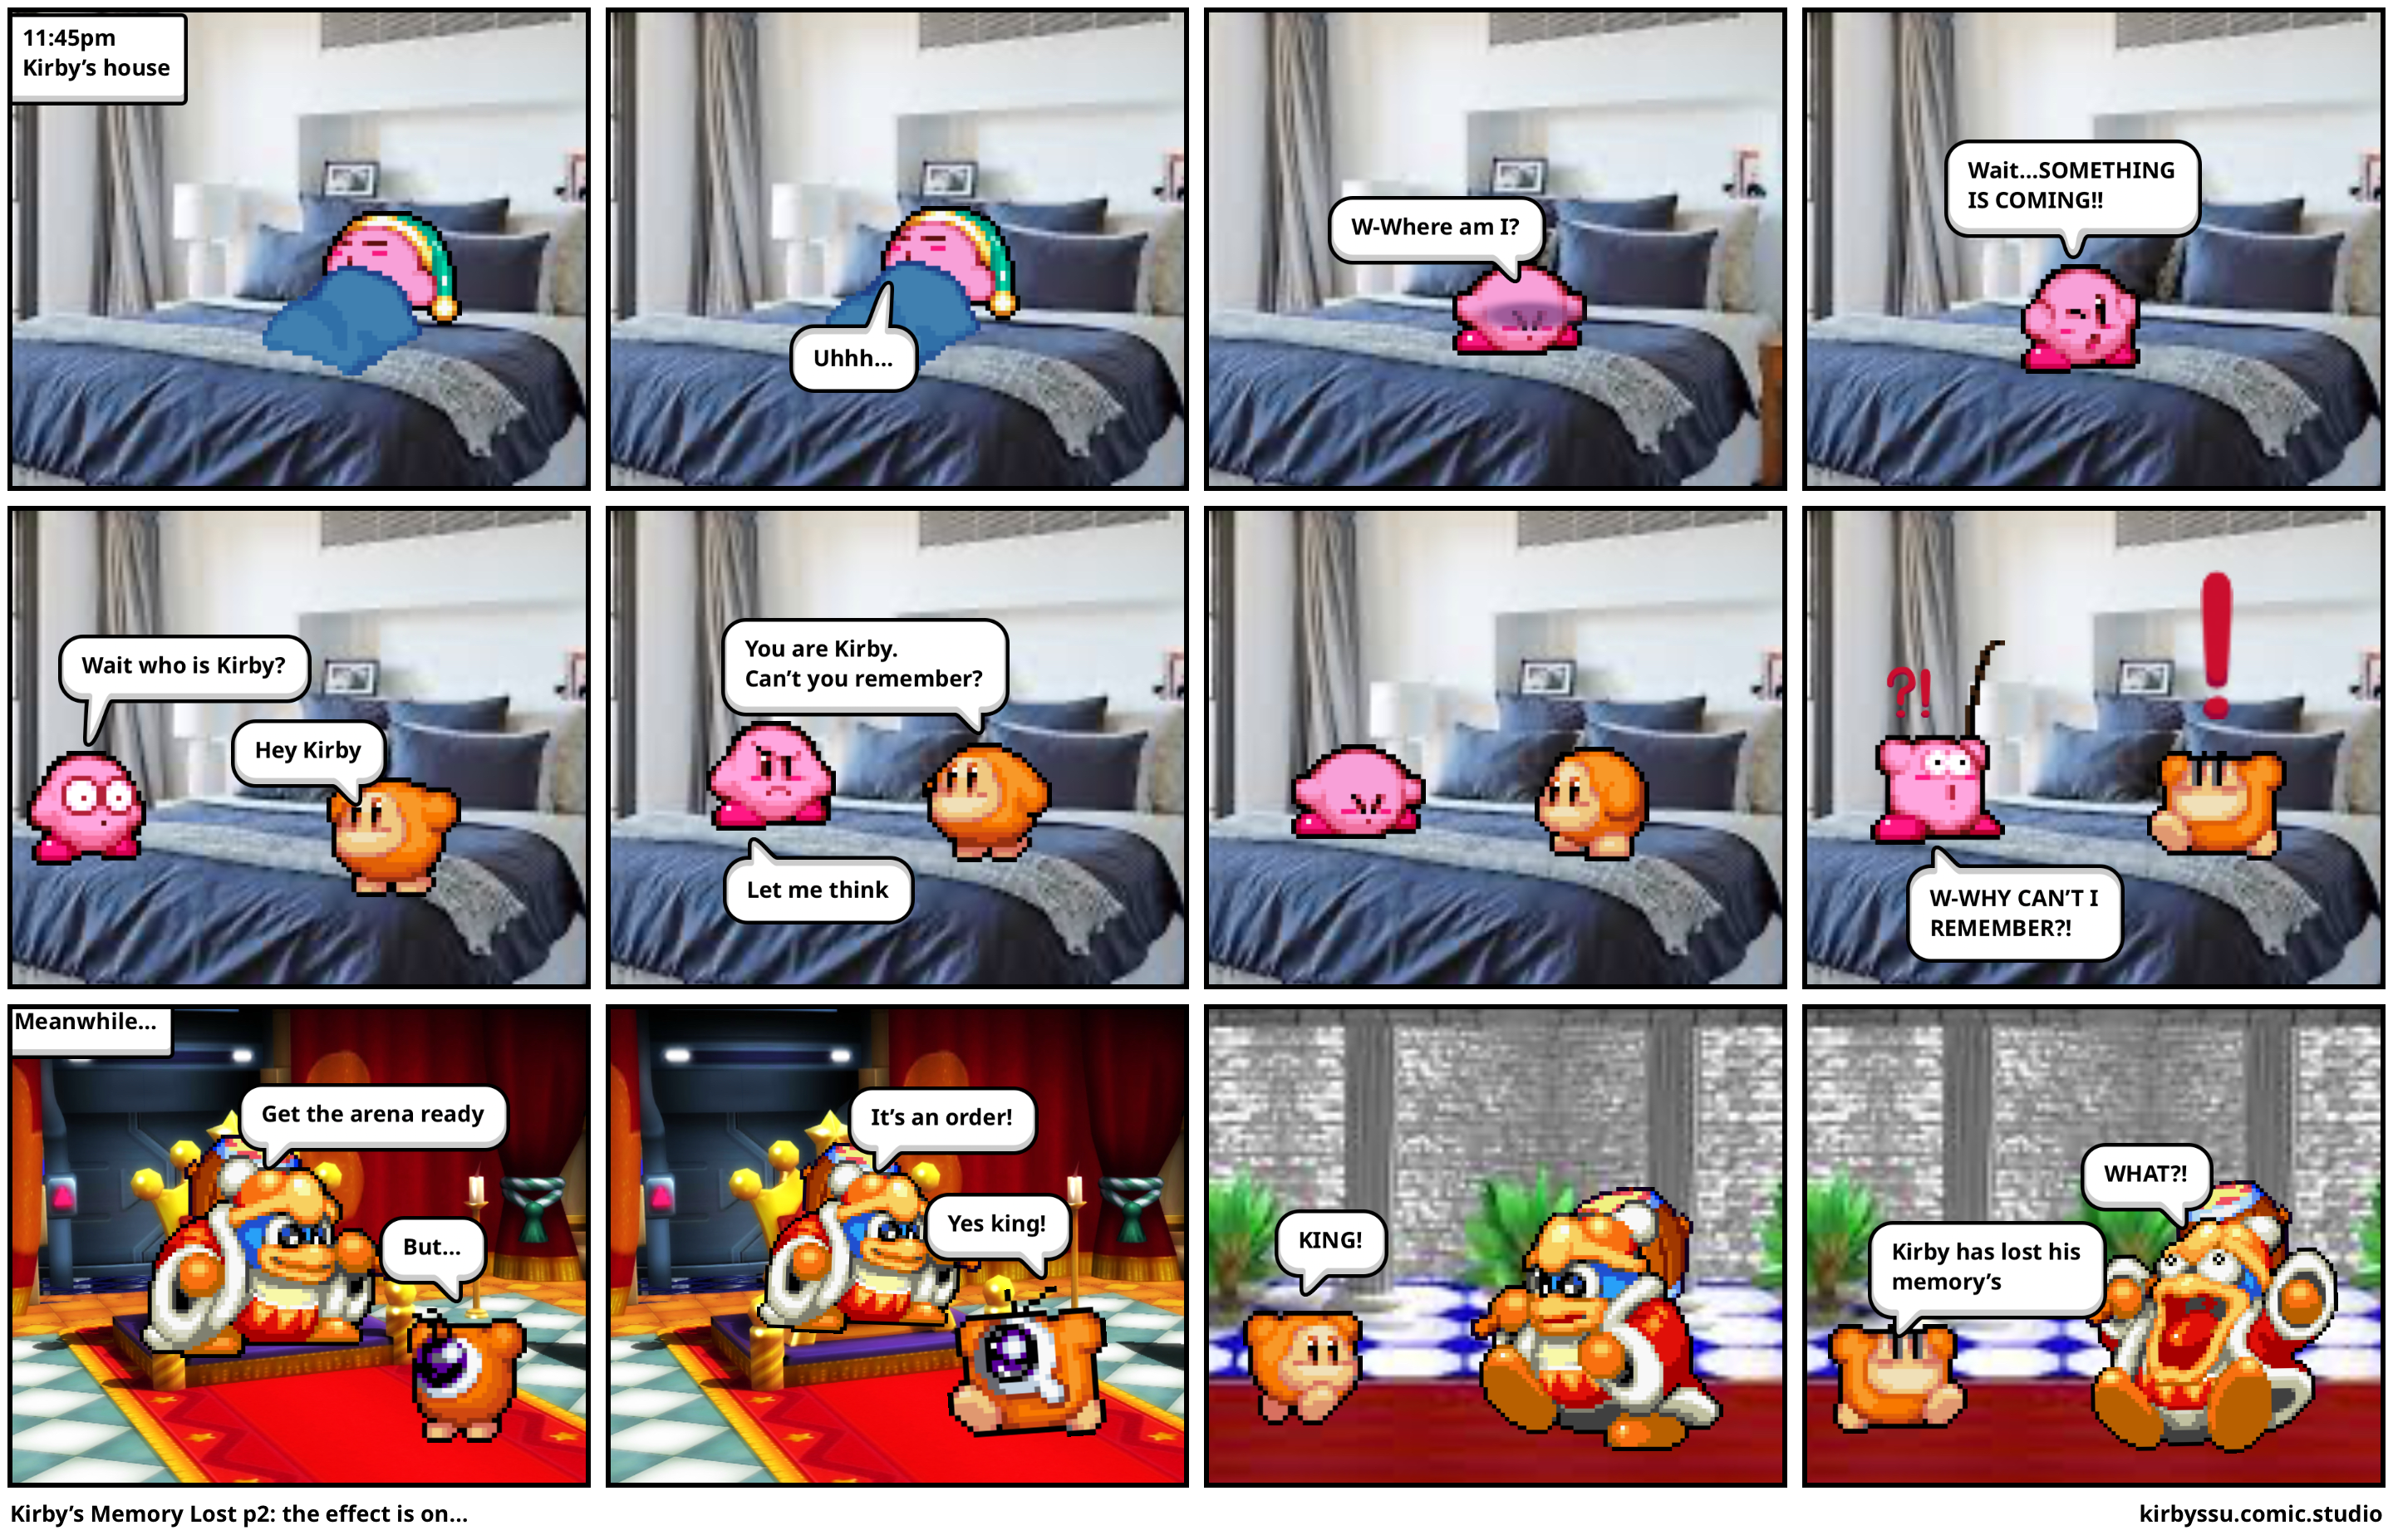 Kirby’s Memory Lost p2: the effect is on…